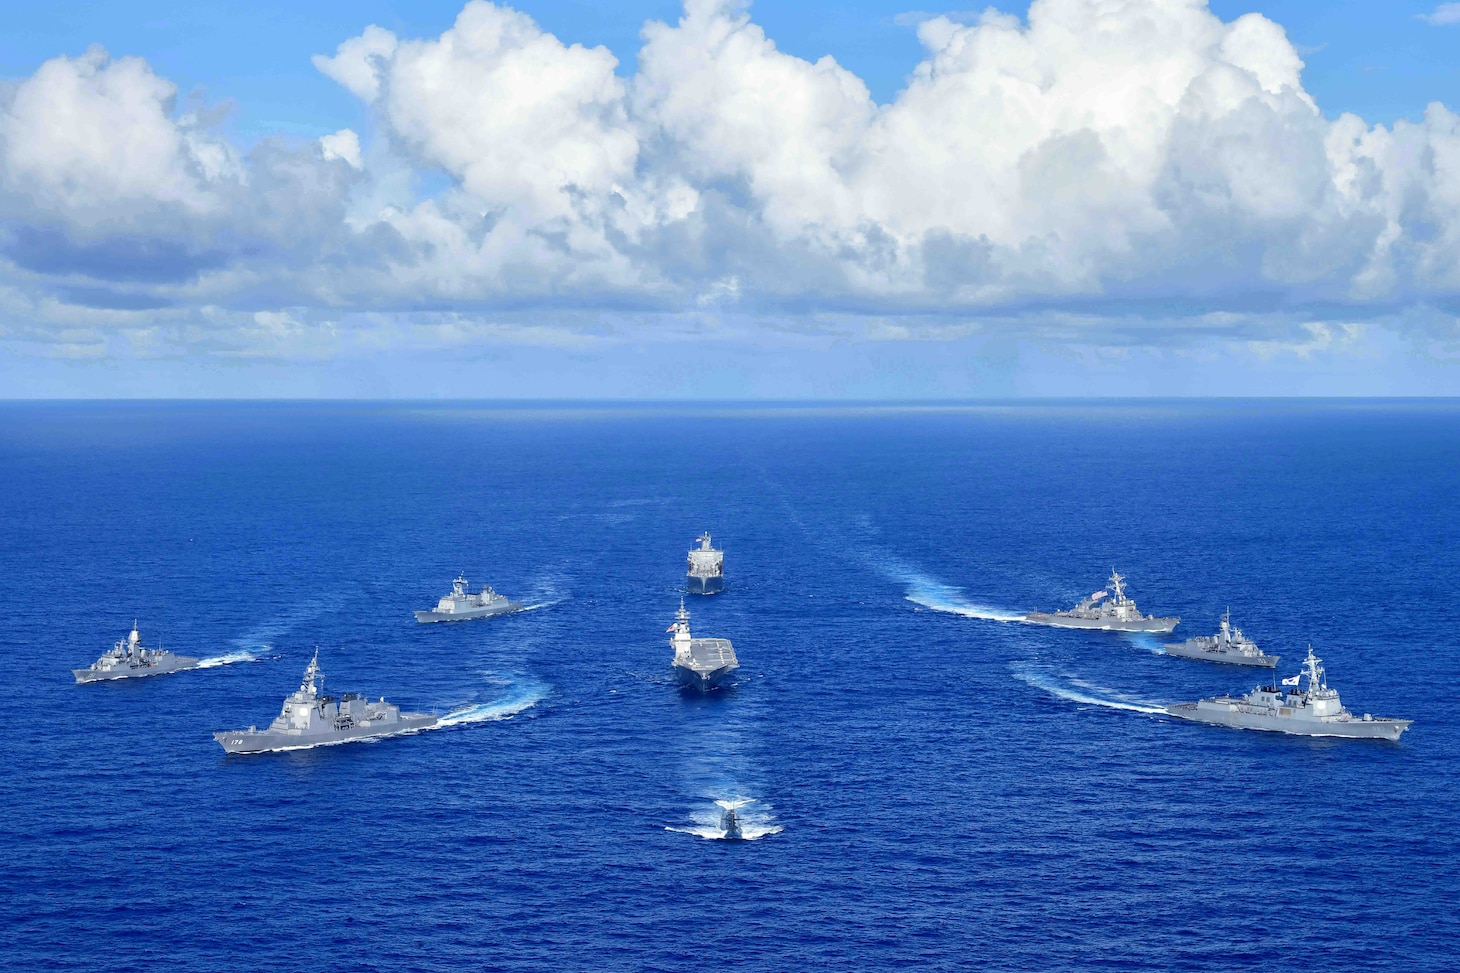 PACIFIC OCEAN (Sept. 11, 2020) – Royal Australian Navy, Republic of Korea Navy, Japan Maritime Self-Defense Force, and United States Navy warships sail in formation during the Pacific Vanguard 2020 exercise. Pacific Vanguard serves as an opportunity to exercise and improve multinational interoperability at all levels; to improve tactical proficiency; and to adapt to ever changing regional challenges. Arleigh Burke-class guided-missile destroyer USS Barry (DDG 52) is underway conducting operations in support of security and stability in the Indo-Pacific while assigned to Destroyer Squadron (DESRON) 15, the Navy’s largest forward-deployed DESRON and the U.S. 7th Fleet’s principal surface force.